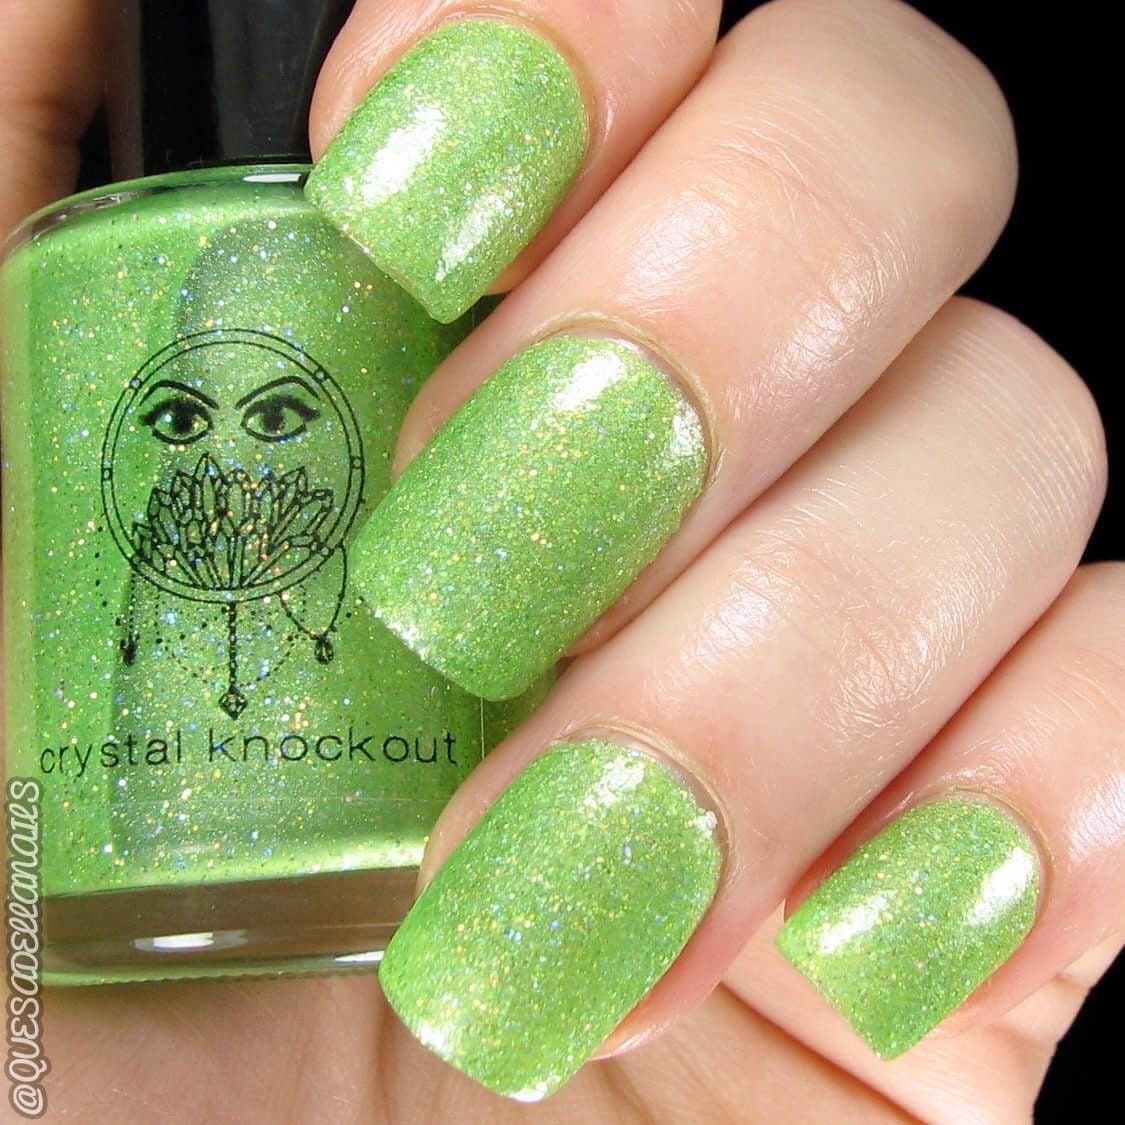 Nail for Hurricane Bright - Knockout Crystal Chemical Party Green Vegan, Polish Holographic Glitter Collection Gifts Reduced Etsy Her